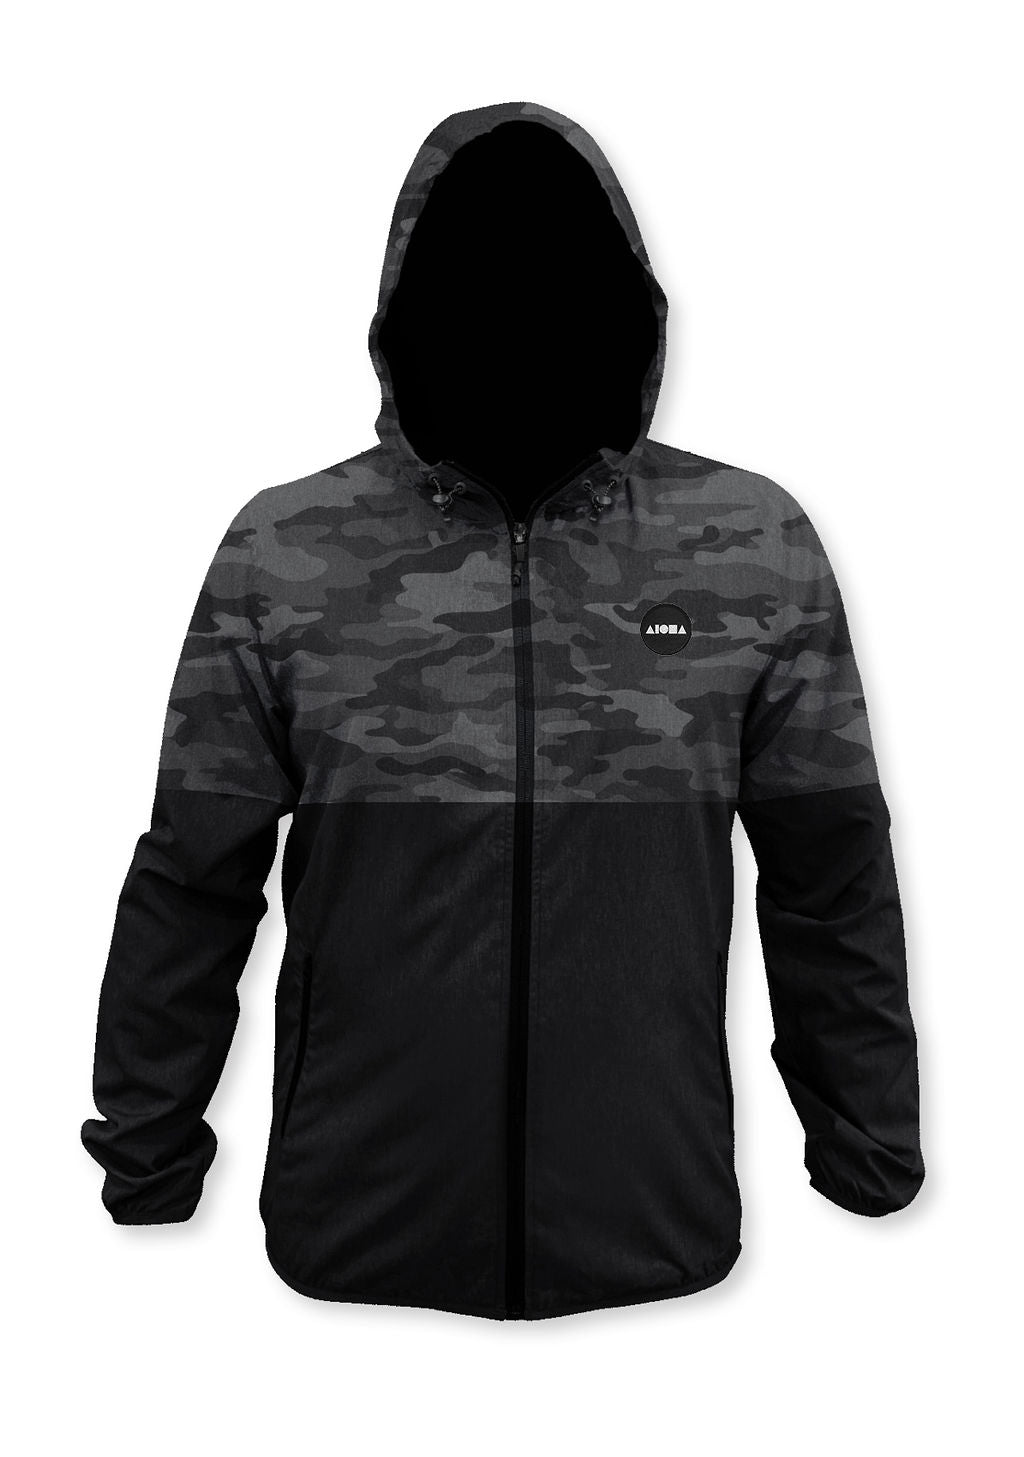 Mens long sleeve hooded rain jacket in greyscale camo with Aloha Surf Shapes logo on front left chest